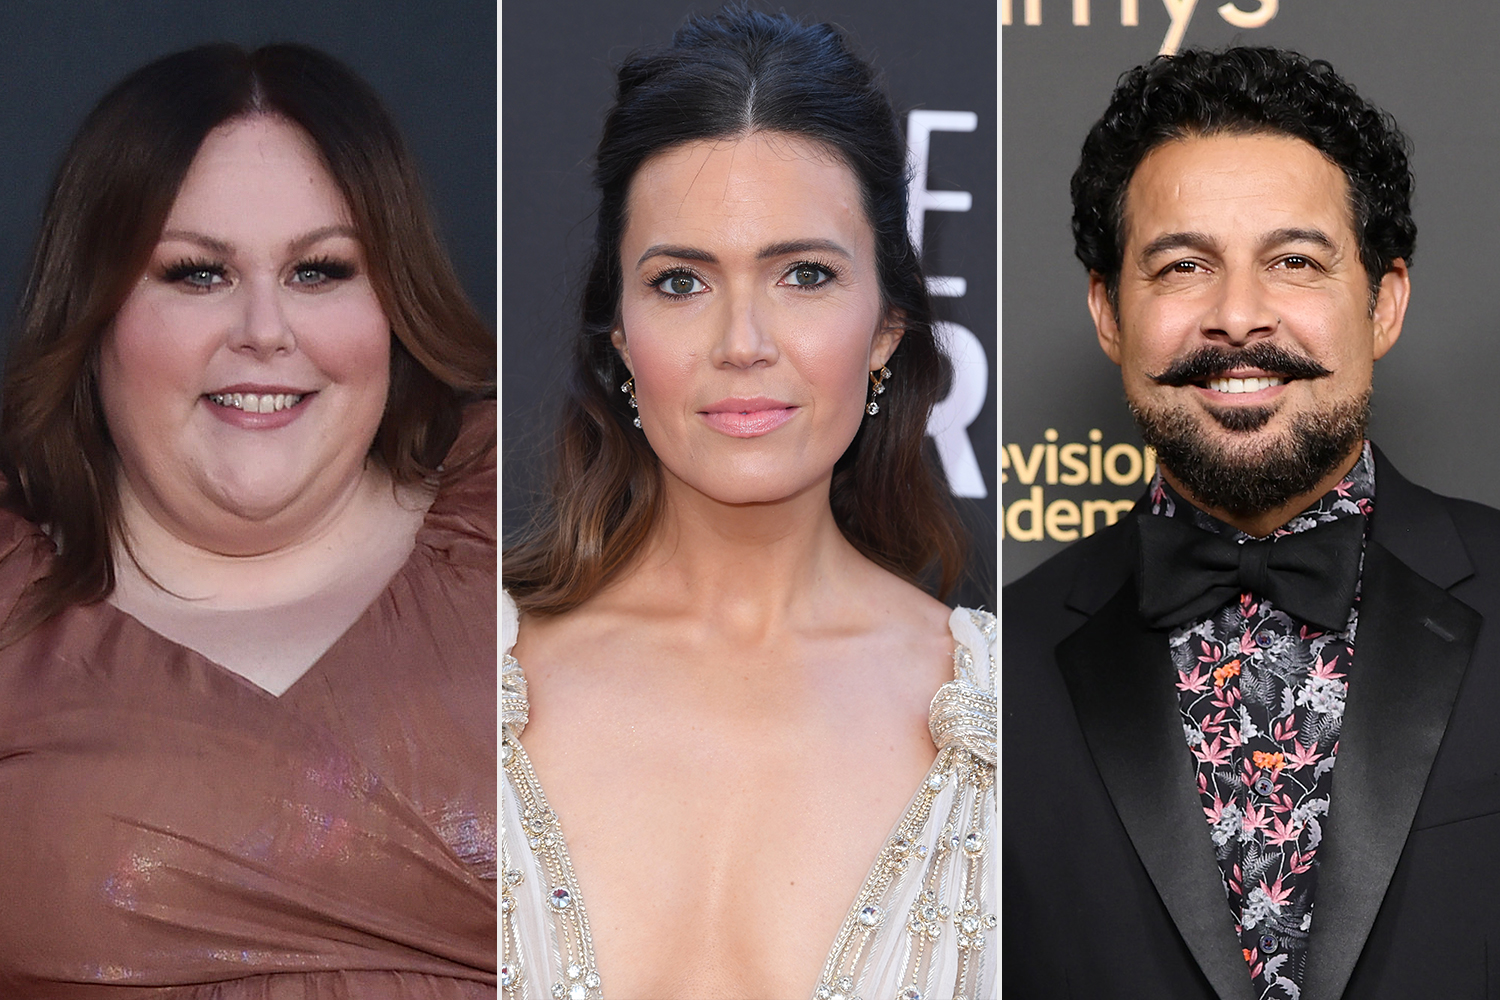 Mandy Moore, Jon Huertas, and Chrissy Metz's mini This is Us reunion on the picket line